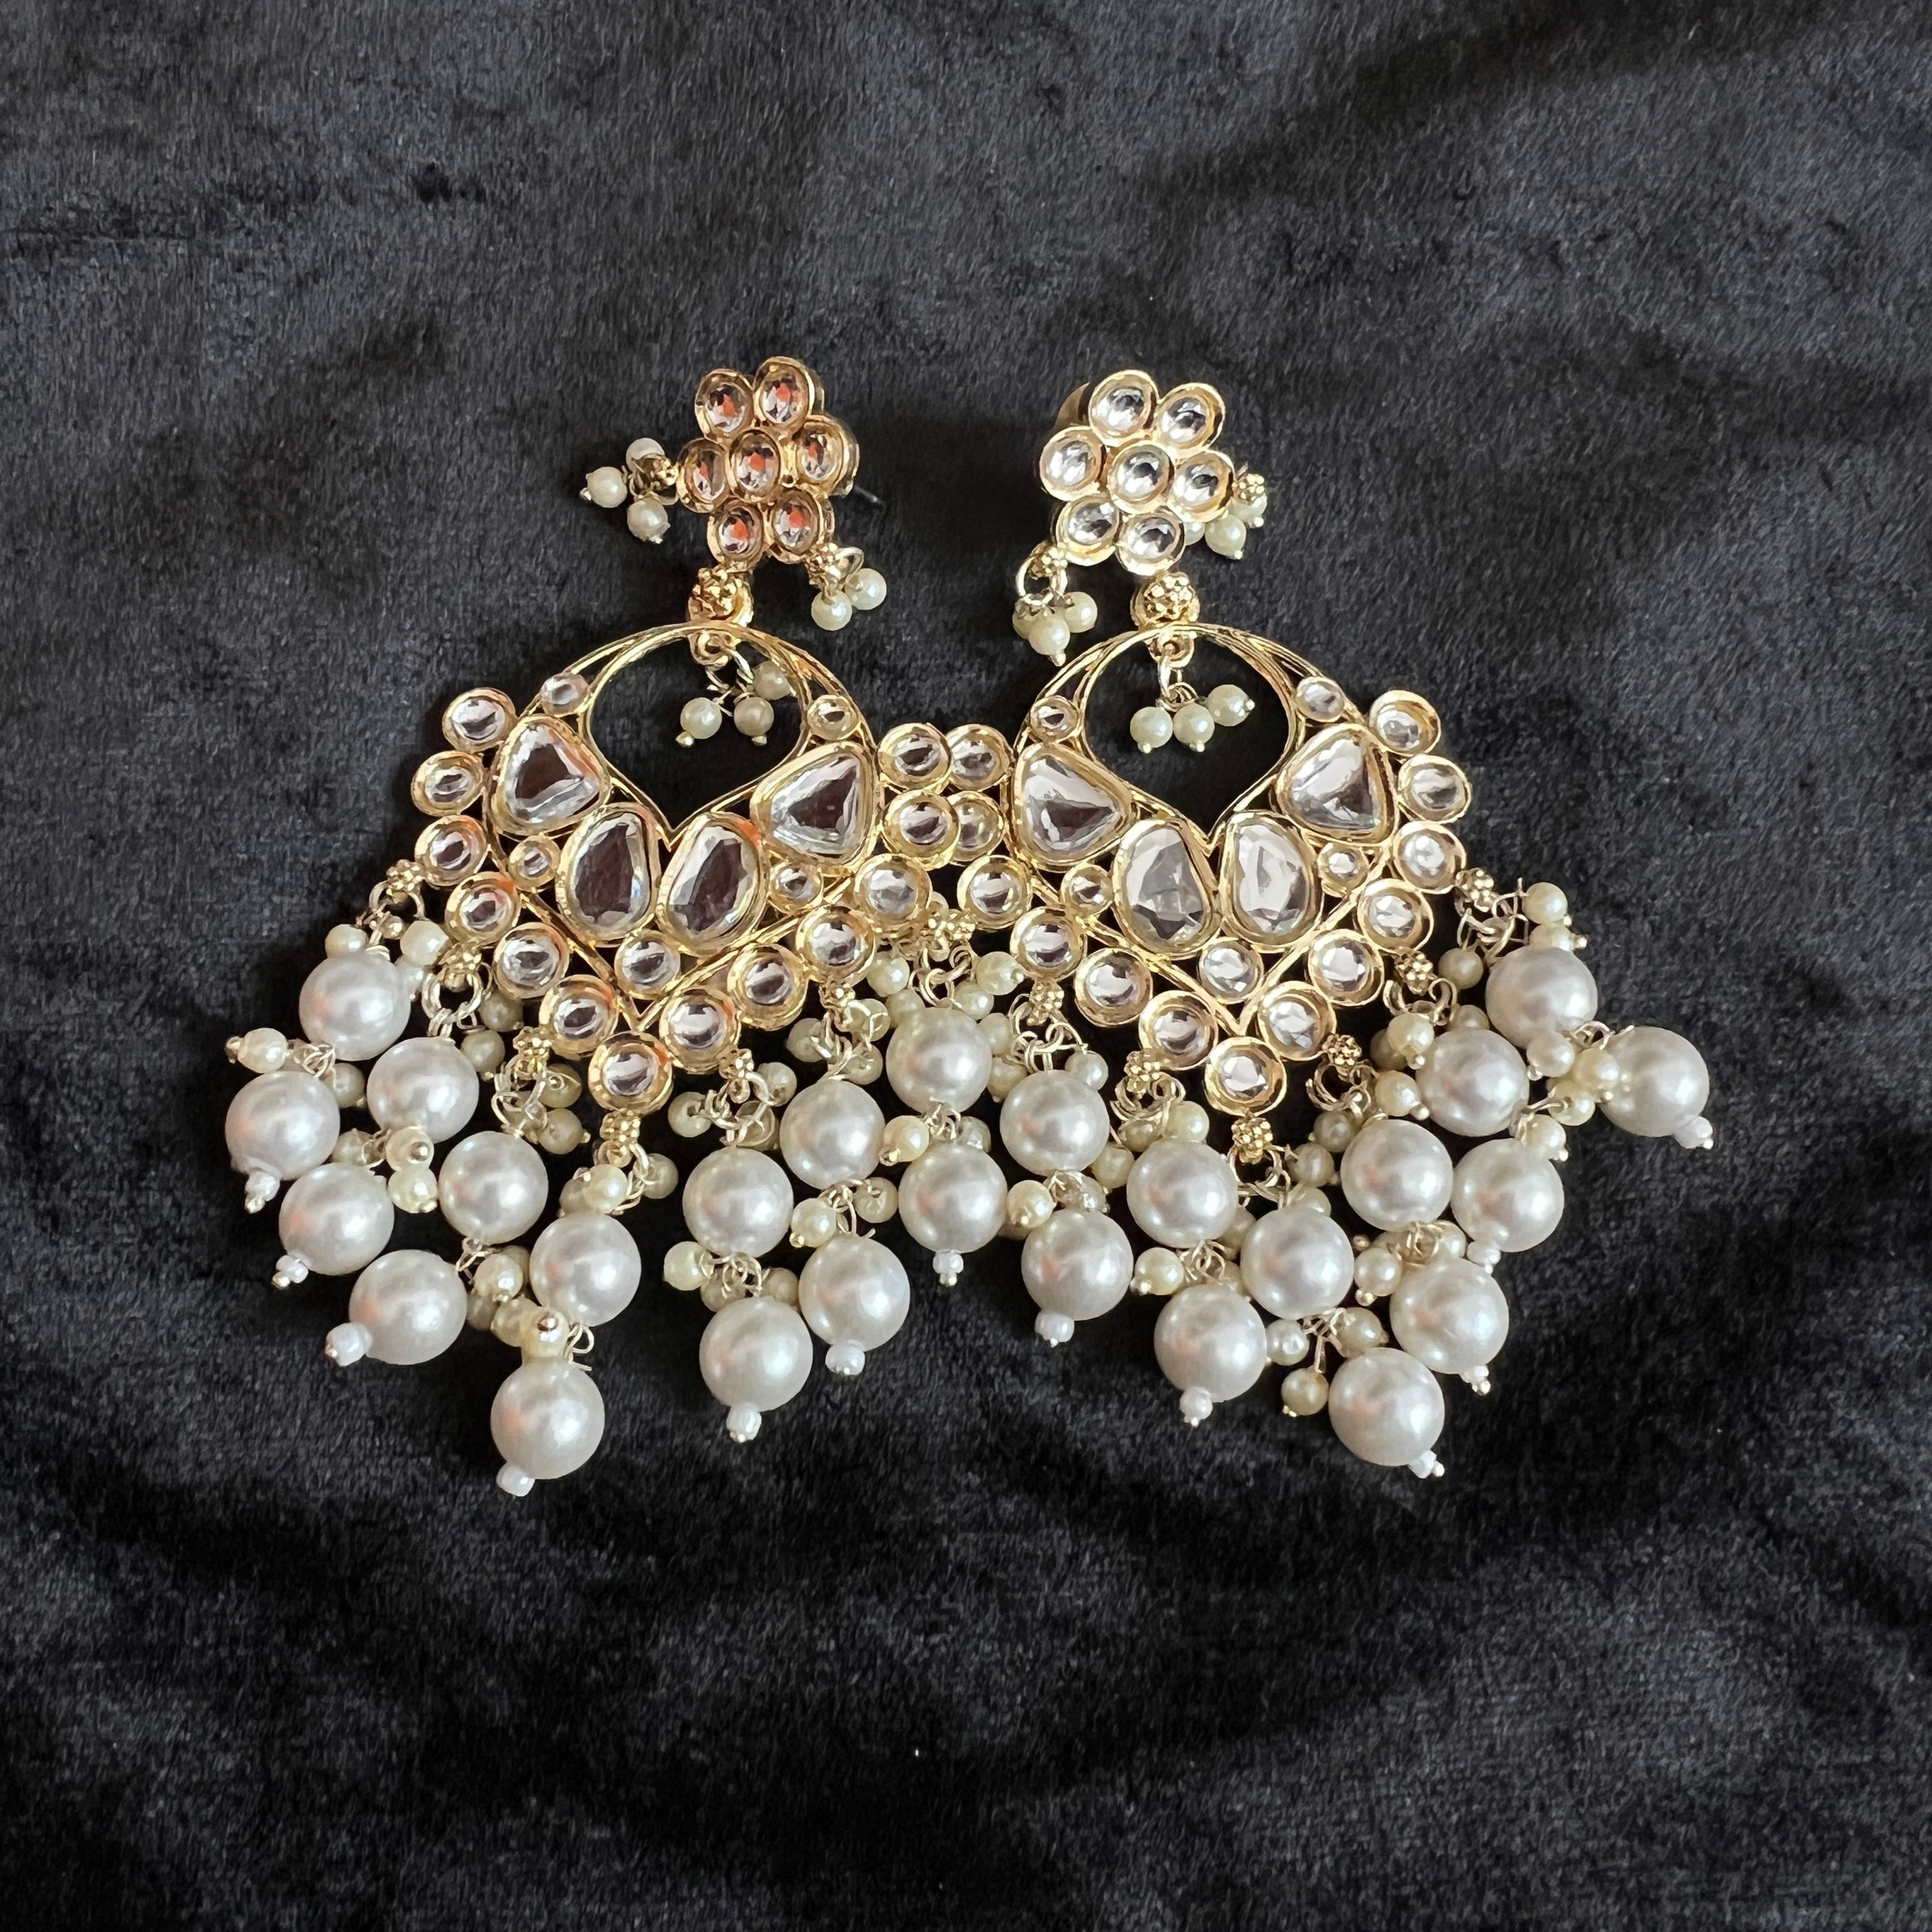 Large White Stone & Pearl Earrings- Many Styles - Vintage India NYC